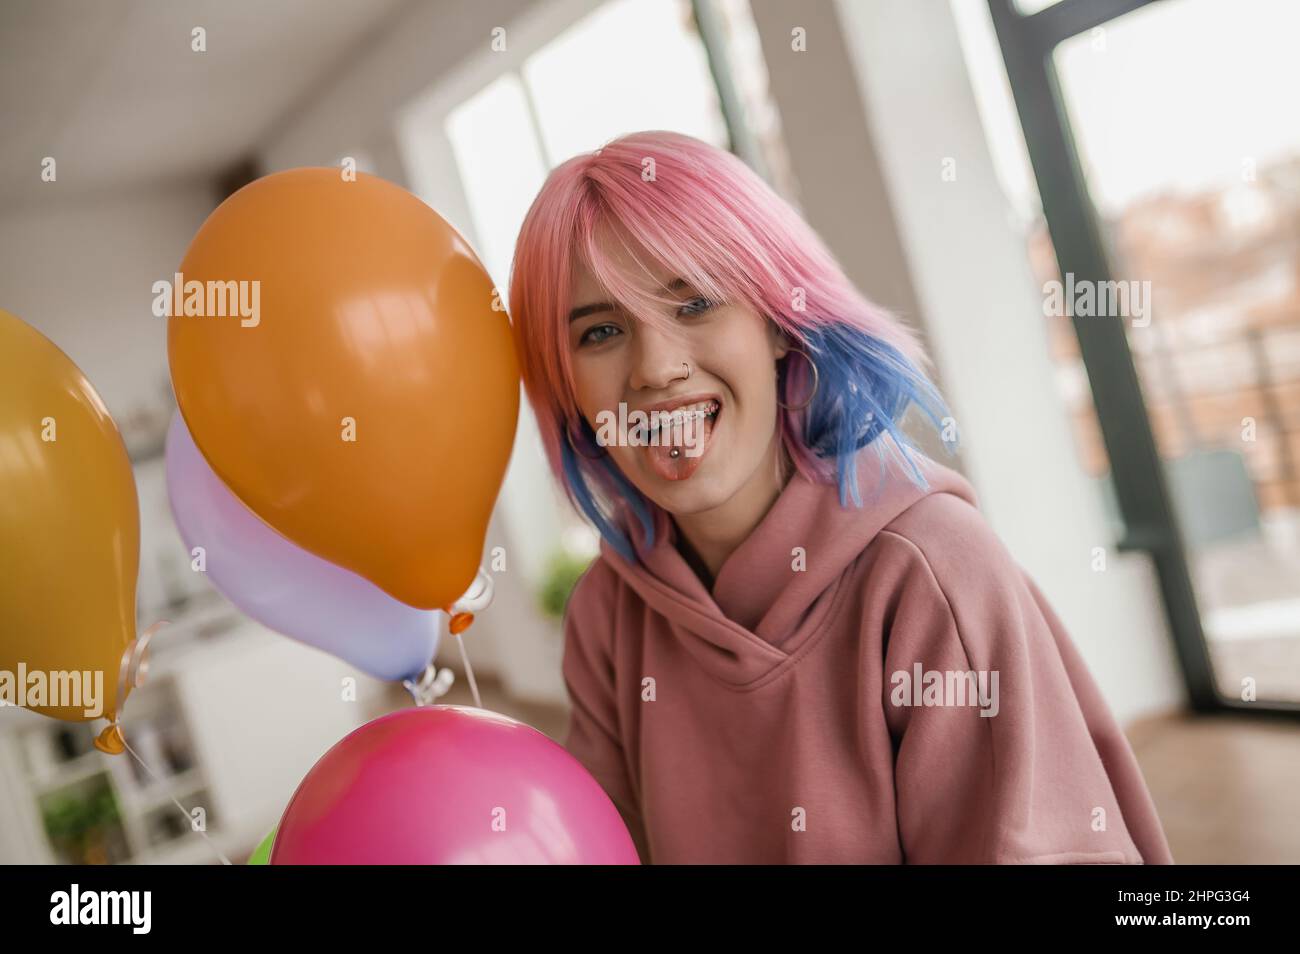 Cute young girl with colored hair looking happy Stock Photo